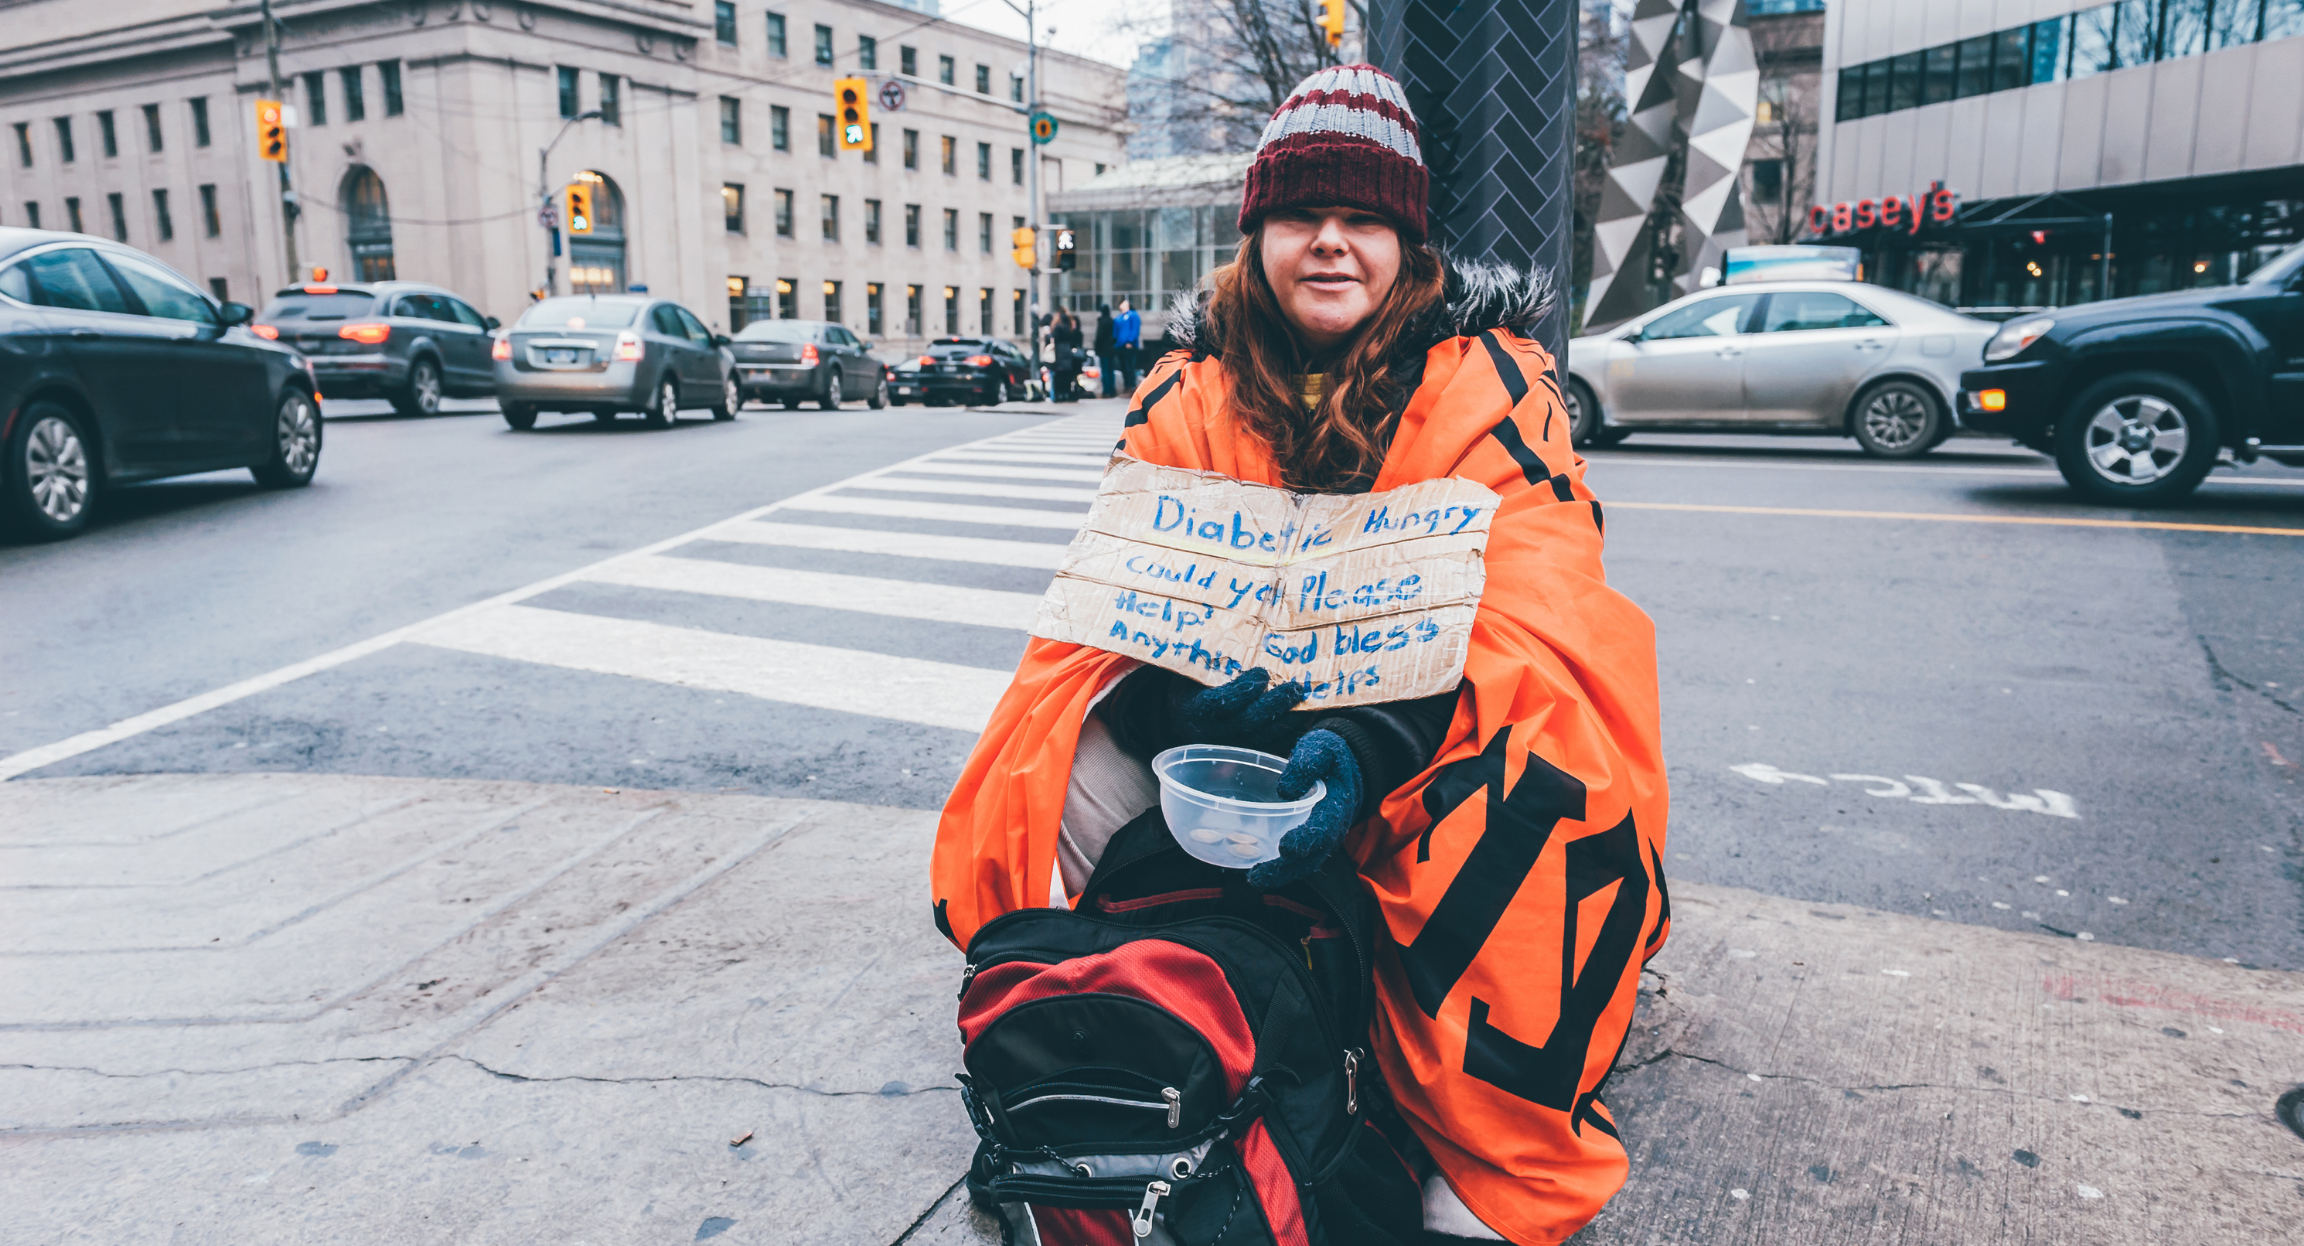 Homeless person on street corner wearing a hat and holding a sign